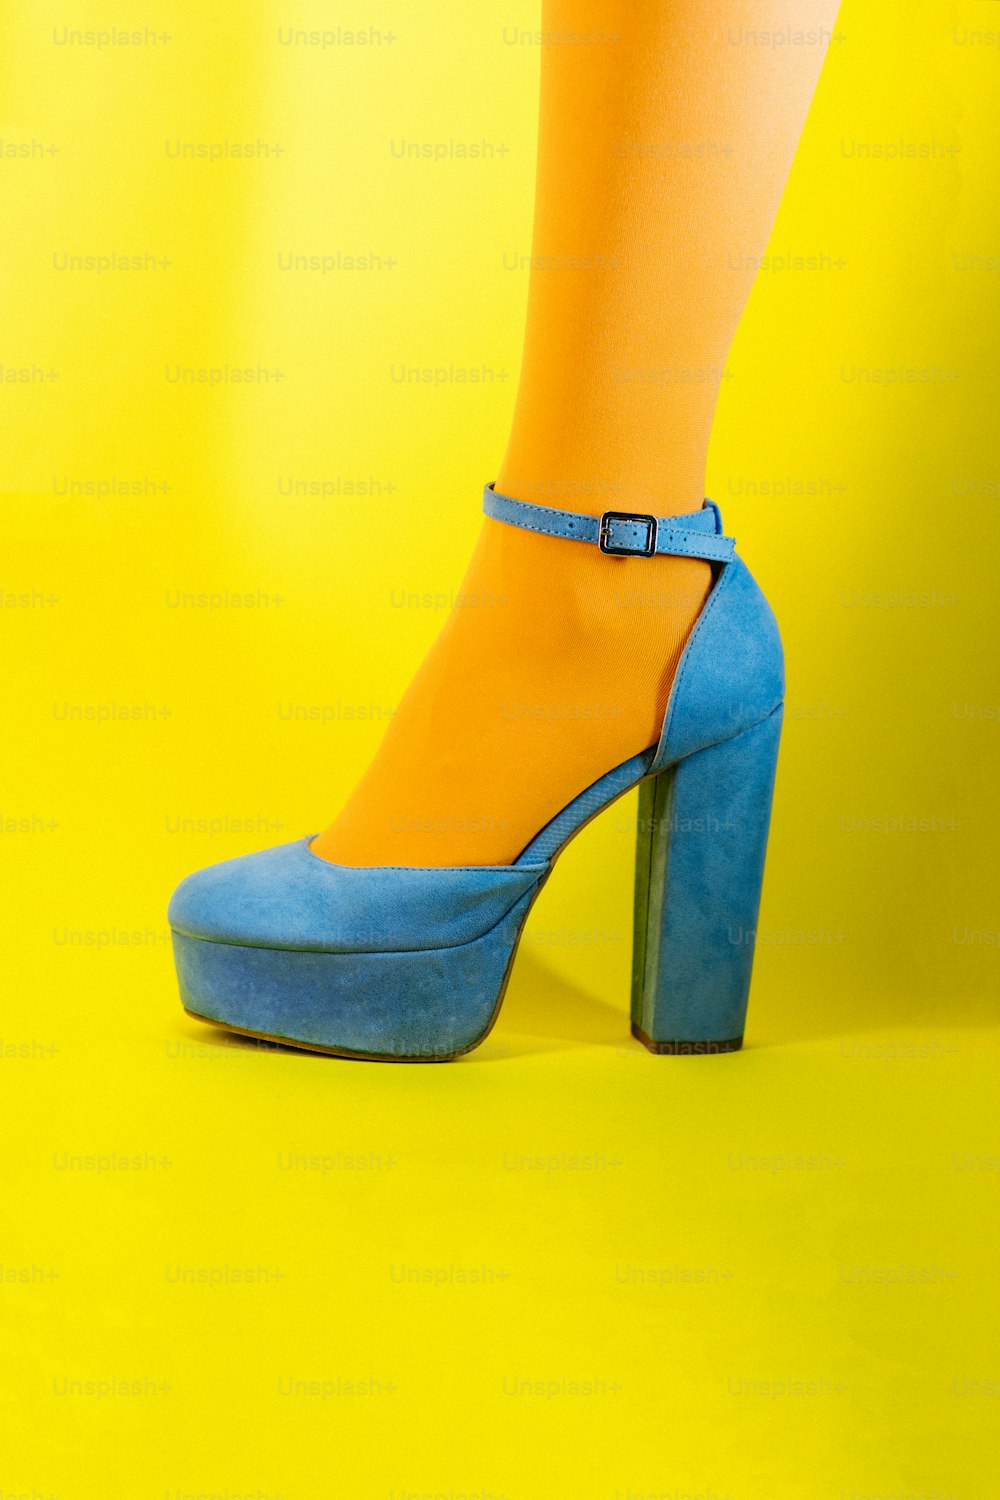 a woman's legs wearing blue and yellow high heels